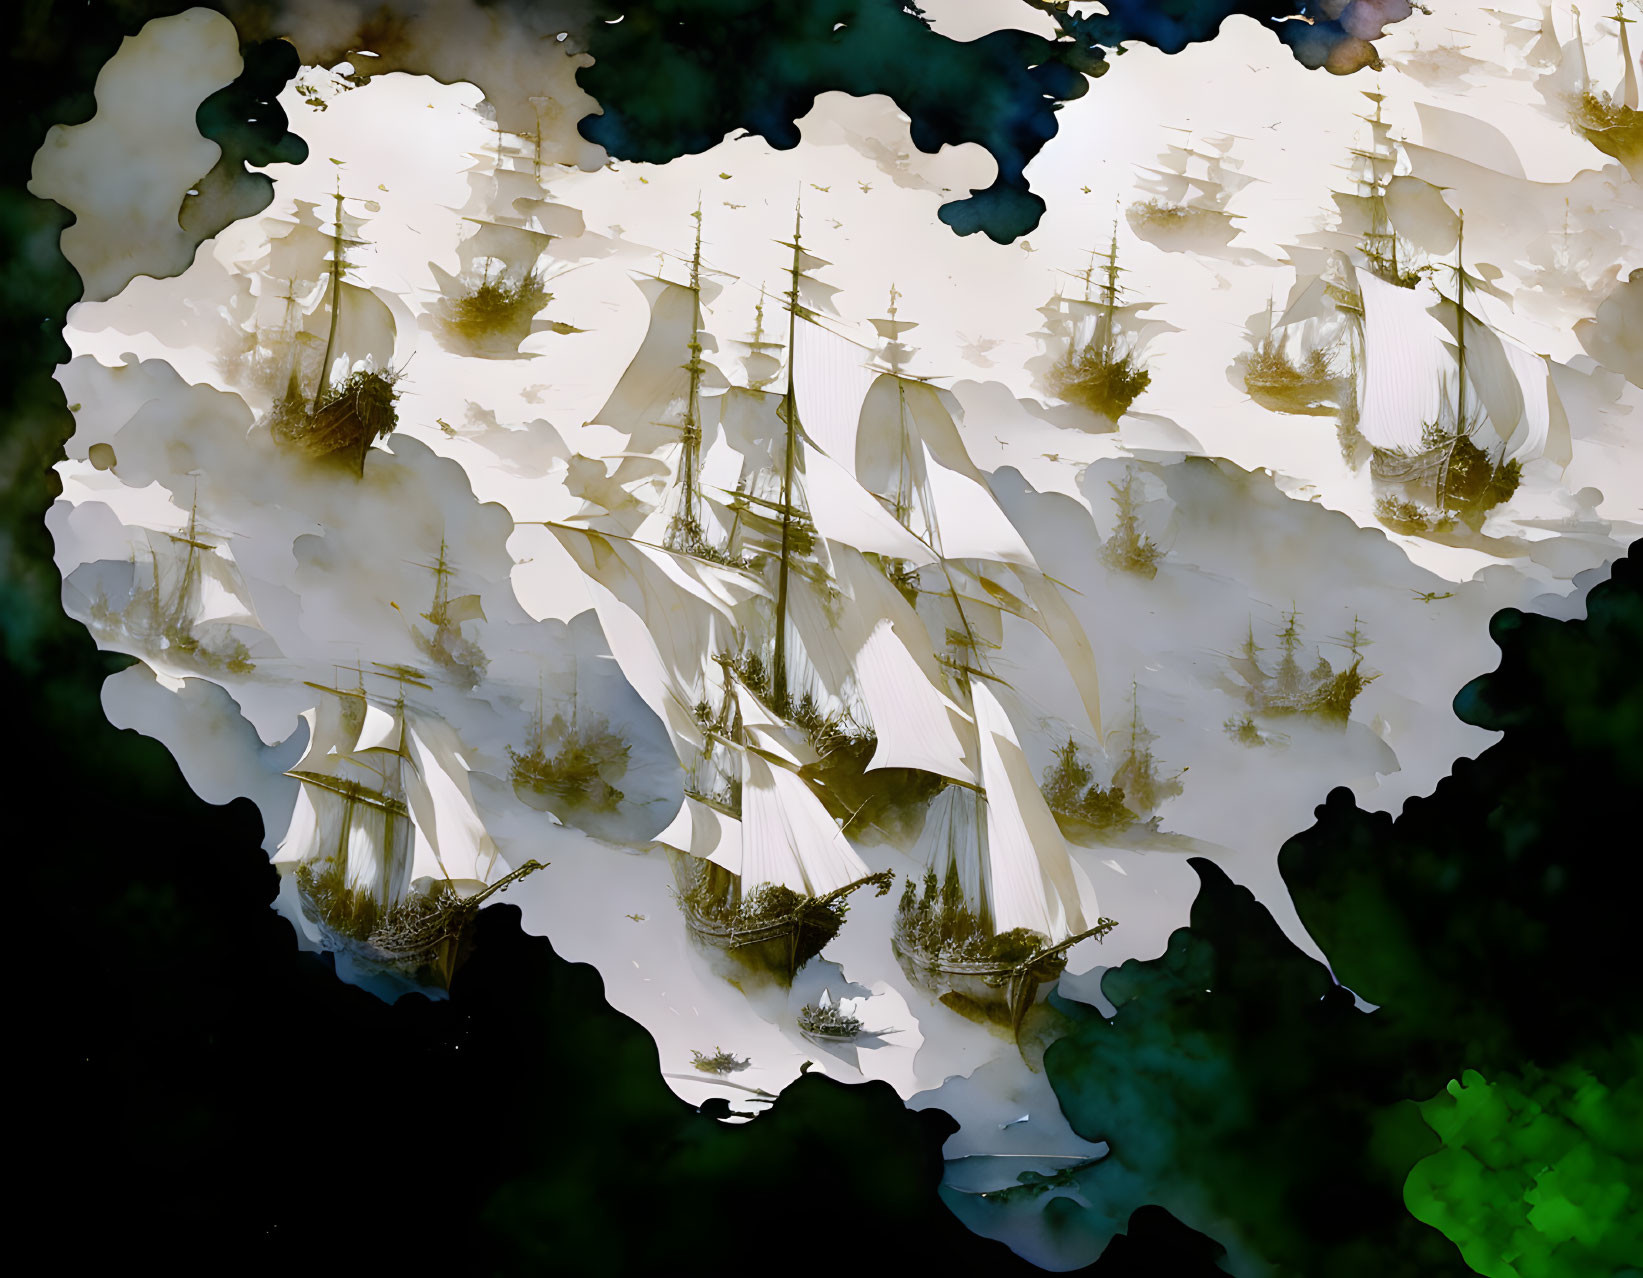 Surreal artwork featuring tall ships and cloud-like terrain